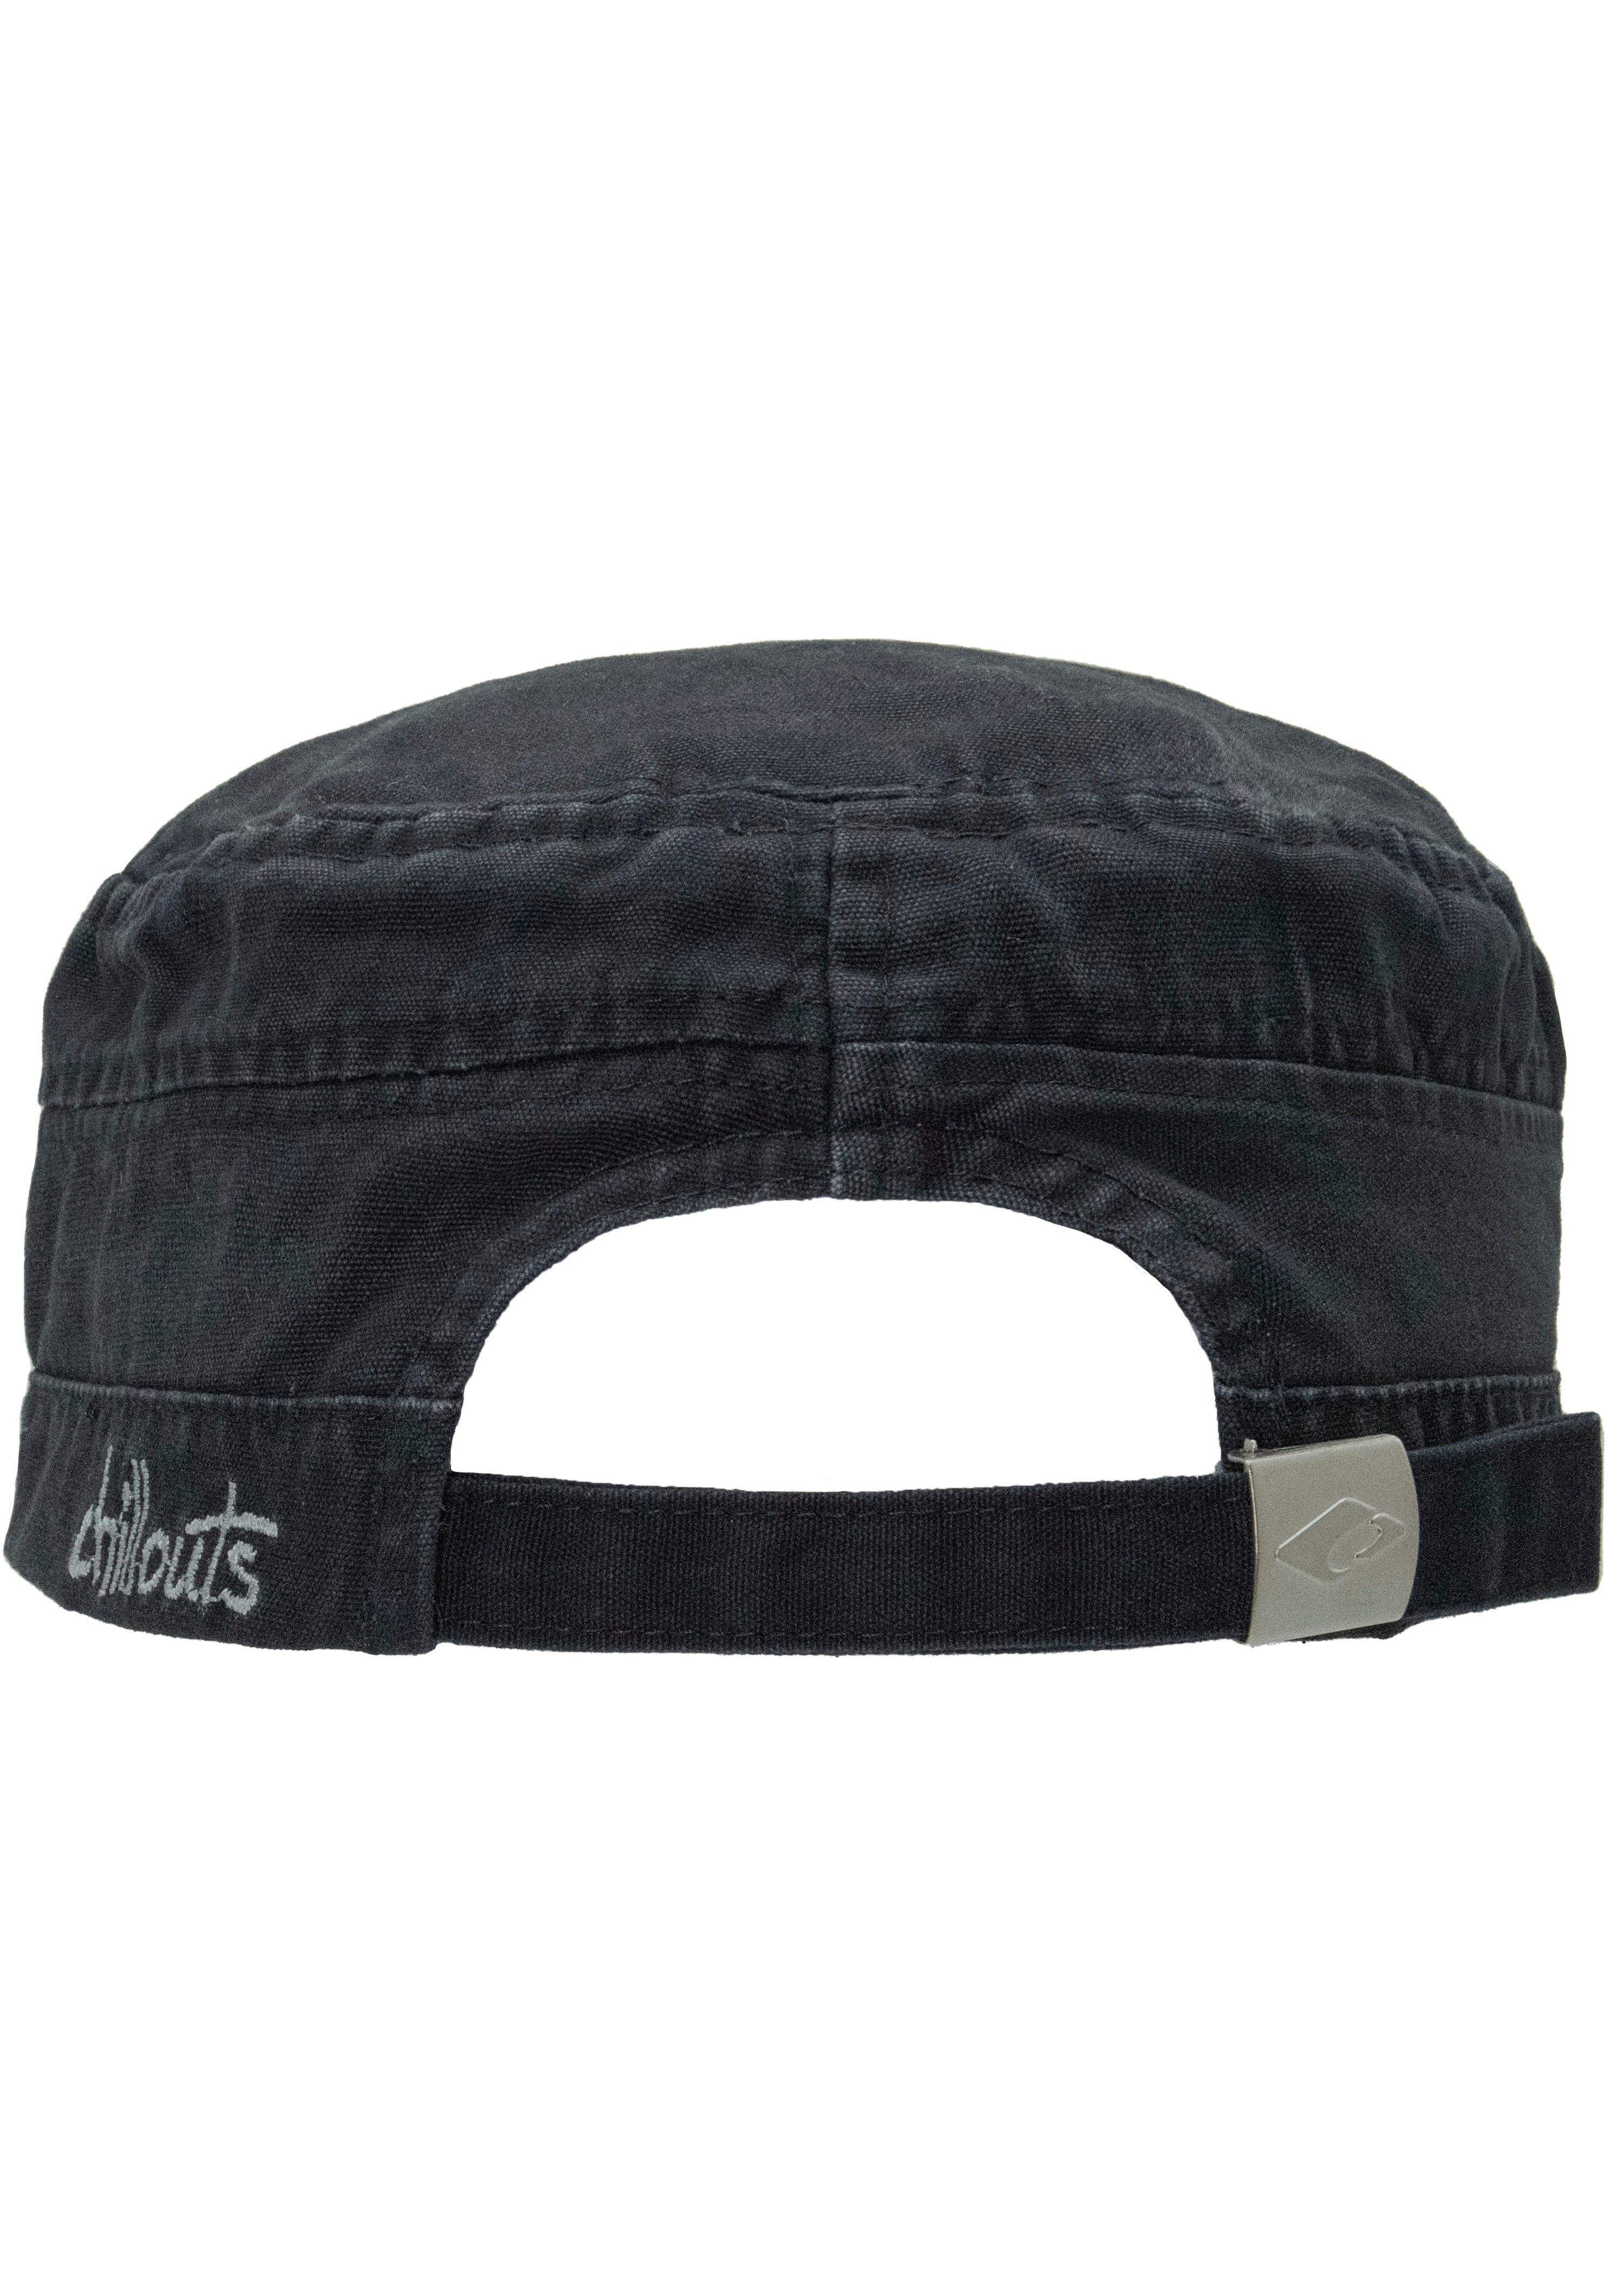 Army atmungsaktiv, Size Hat chillouts reiner Paso aus Baumwolle, washed Cap navy One El